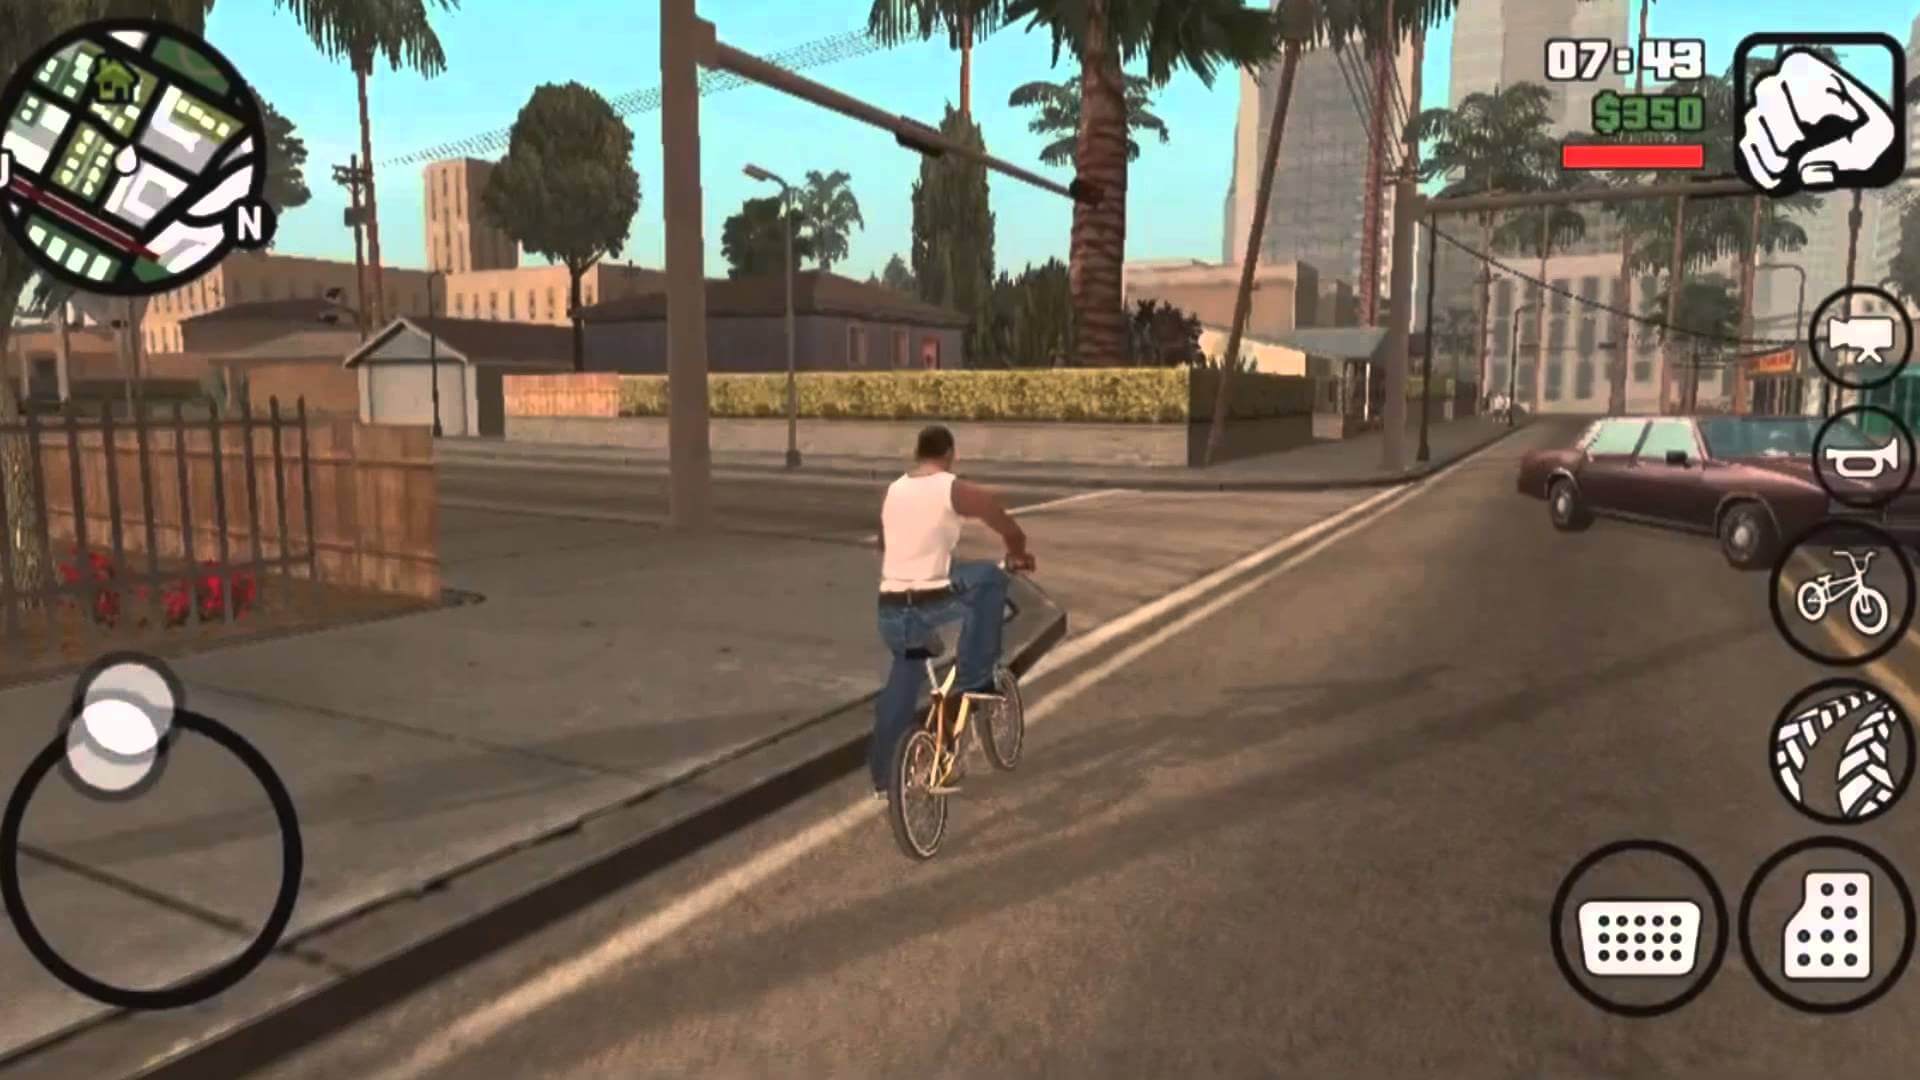 Gta san andreas hack game free download for android